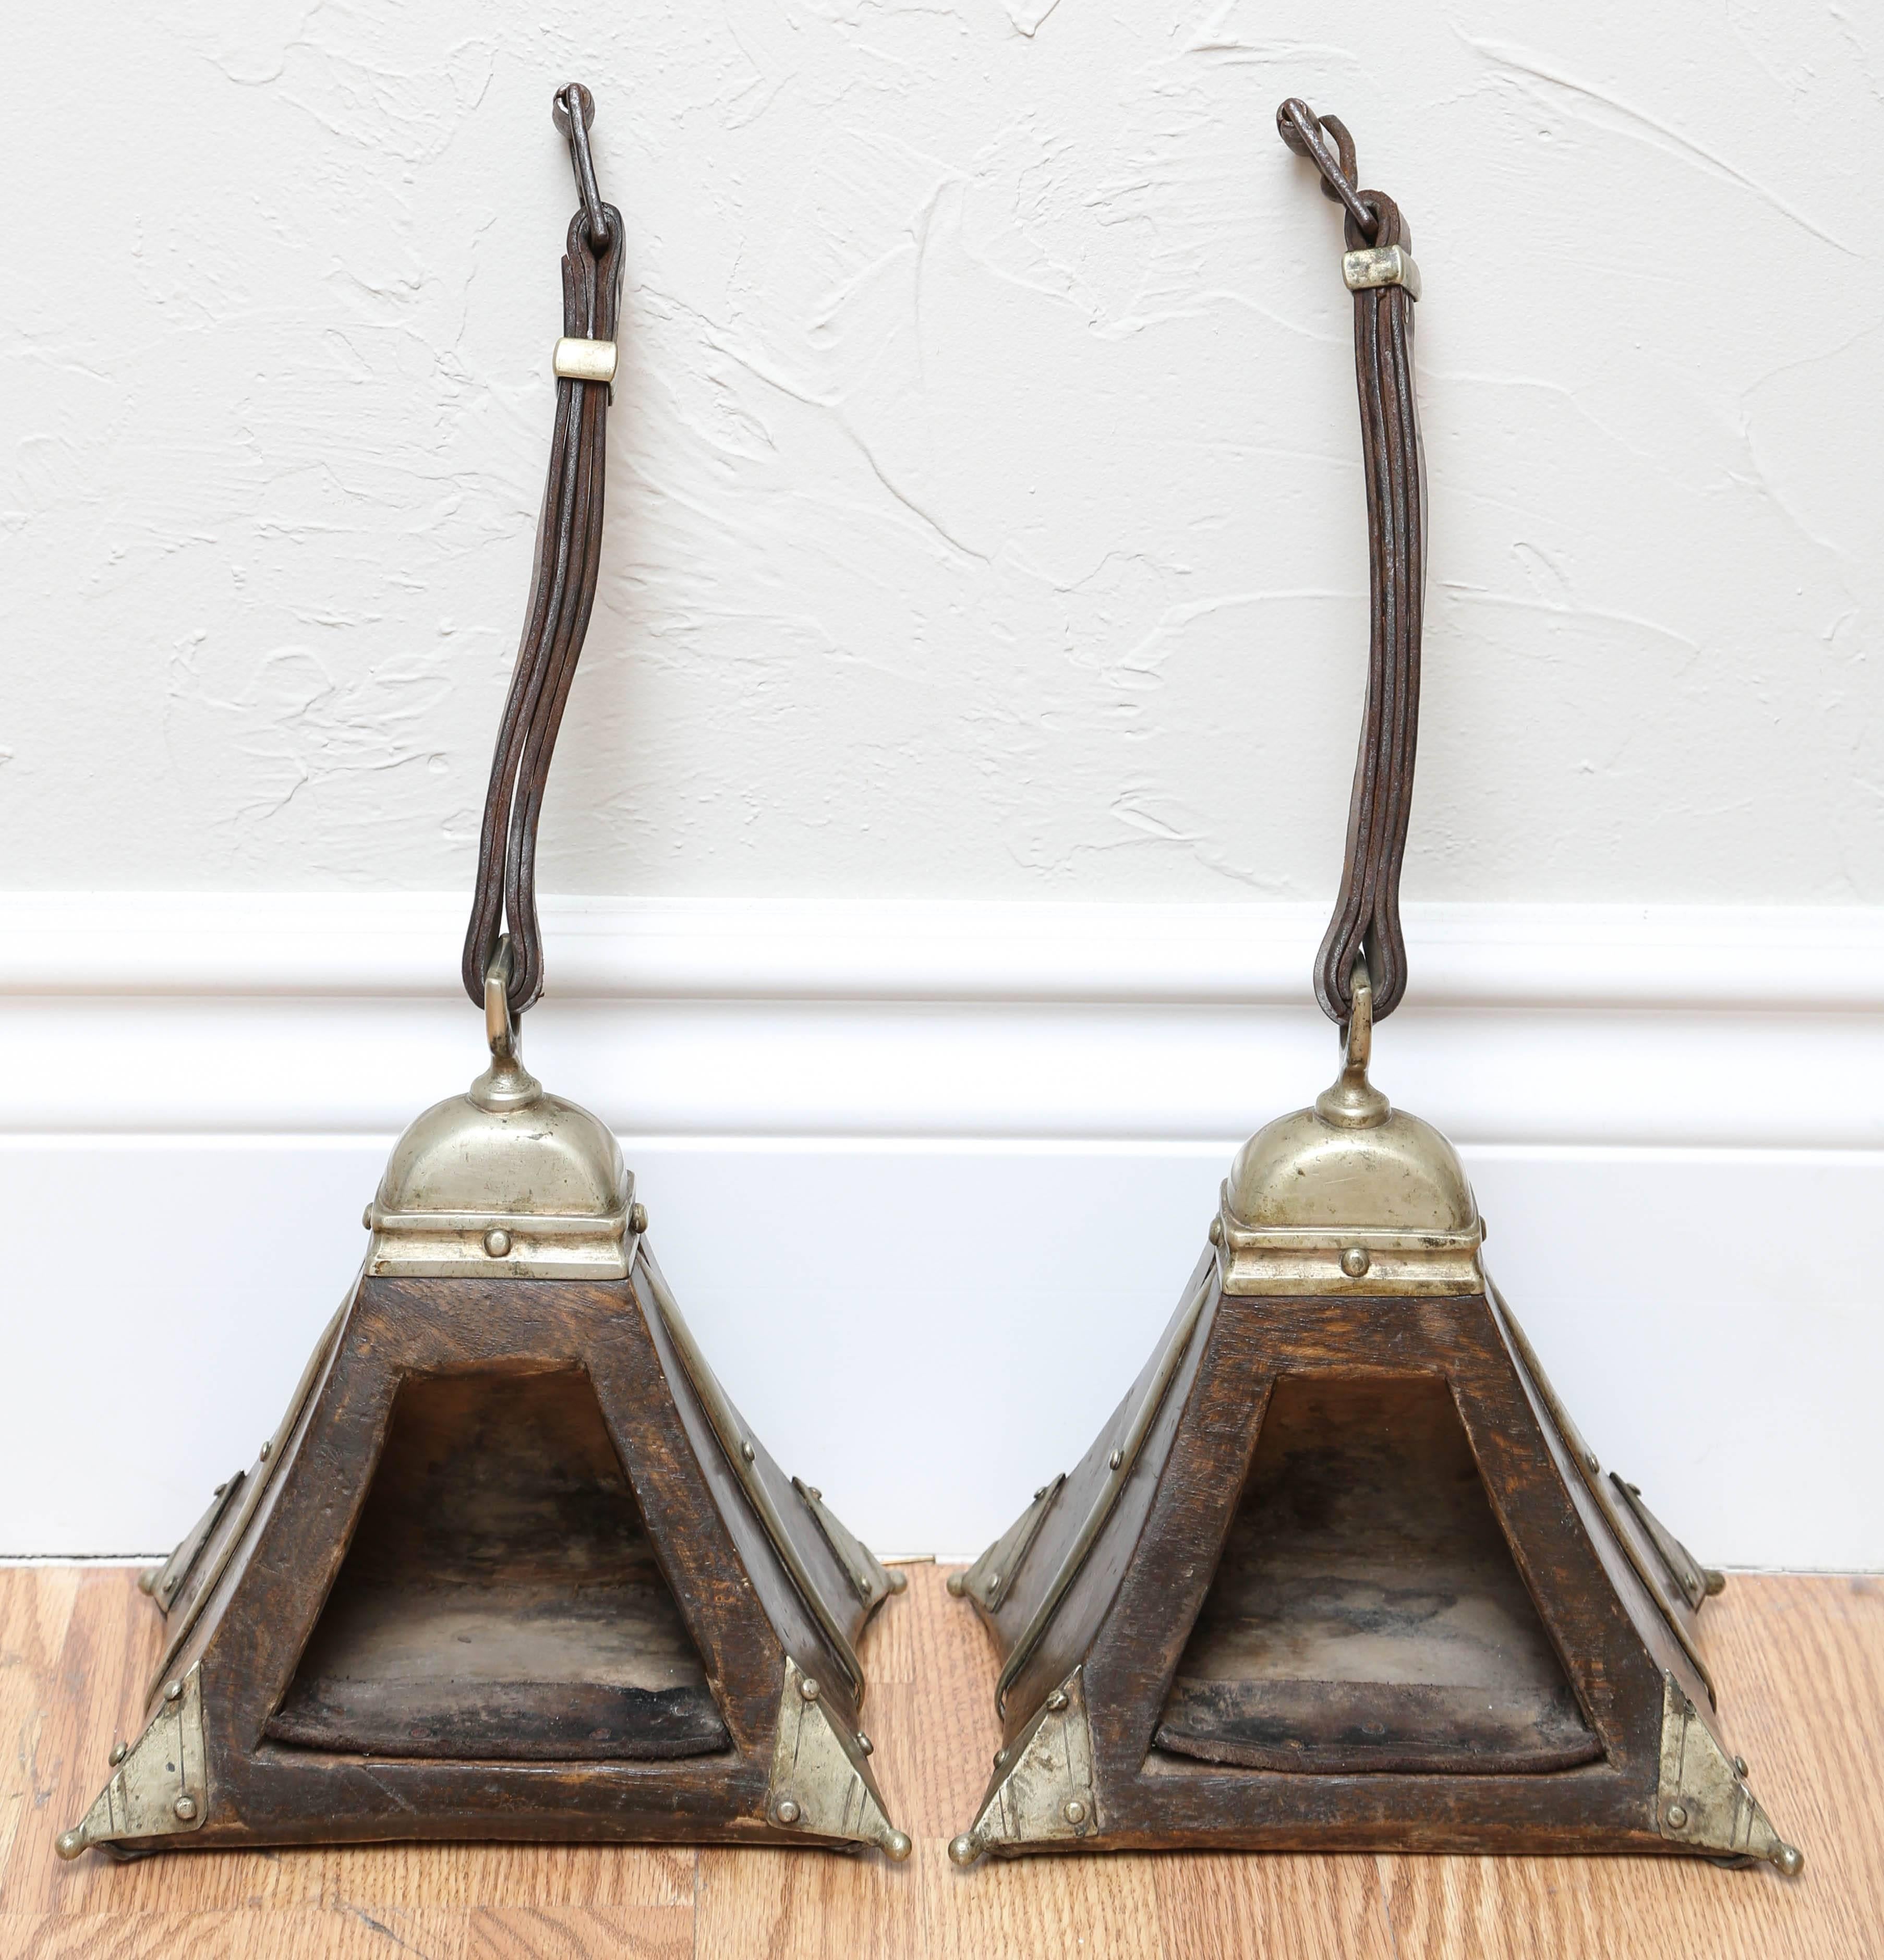 Unique pair of wood and silver plate Guacho stirrups with leather straps and lining.